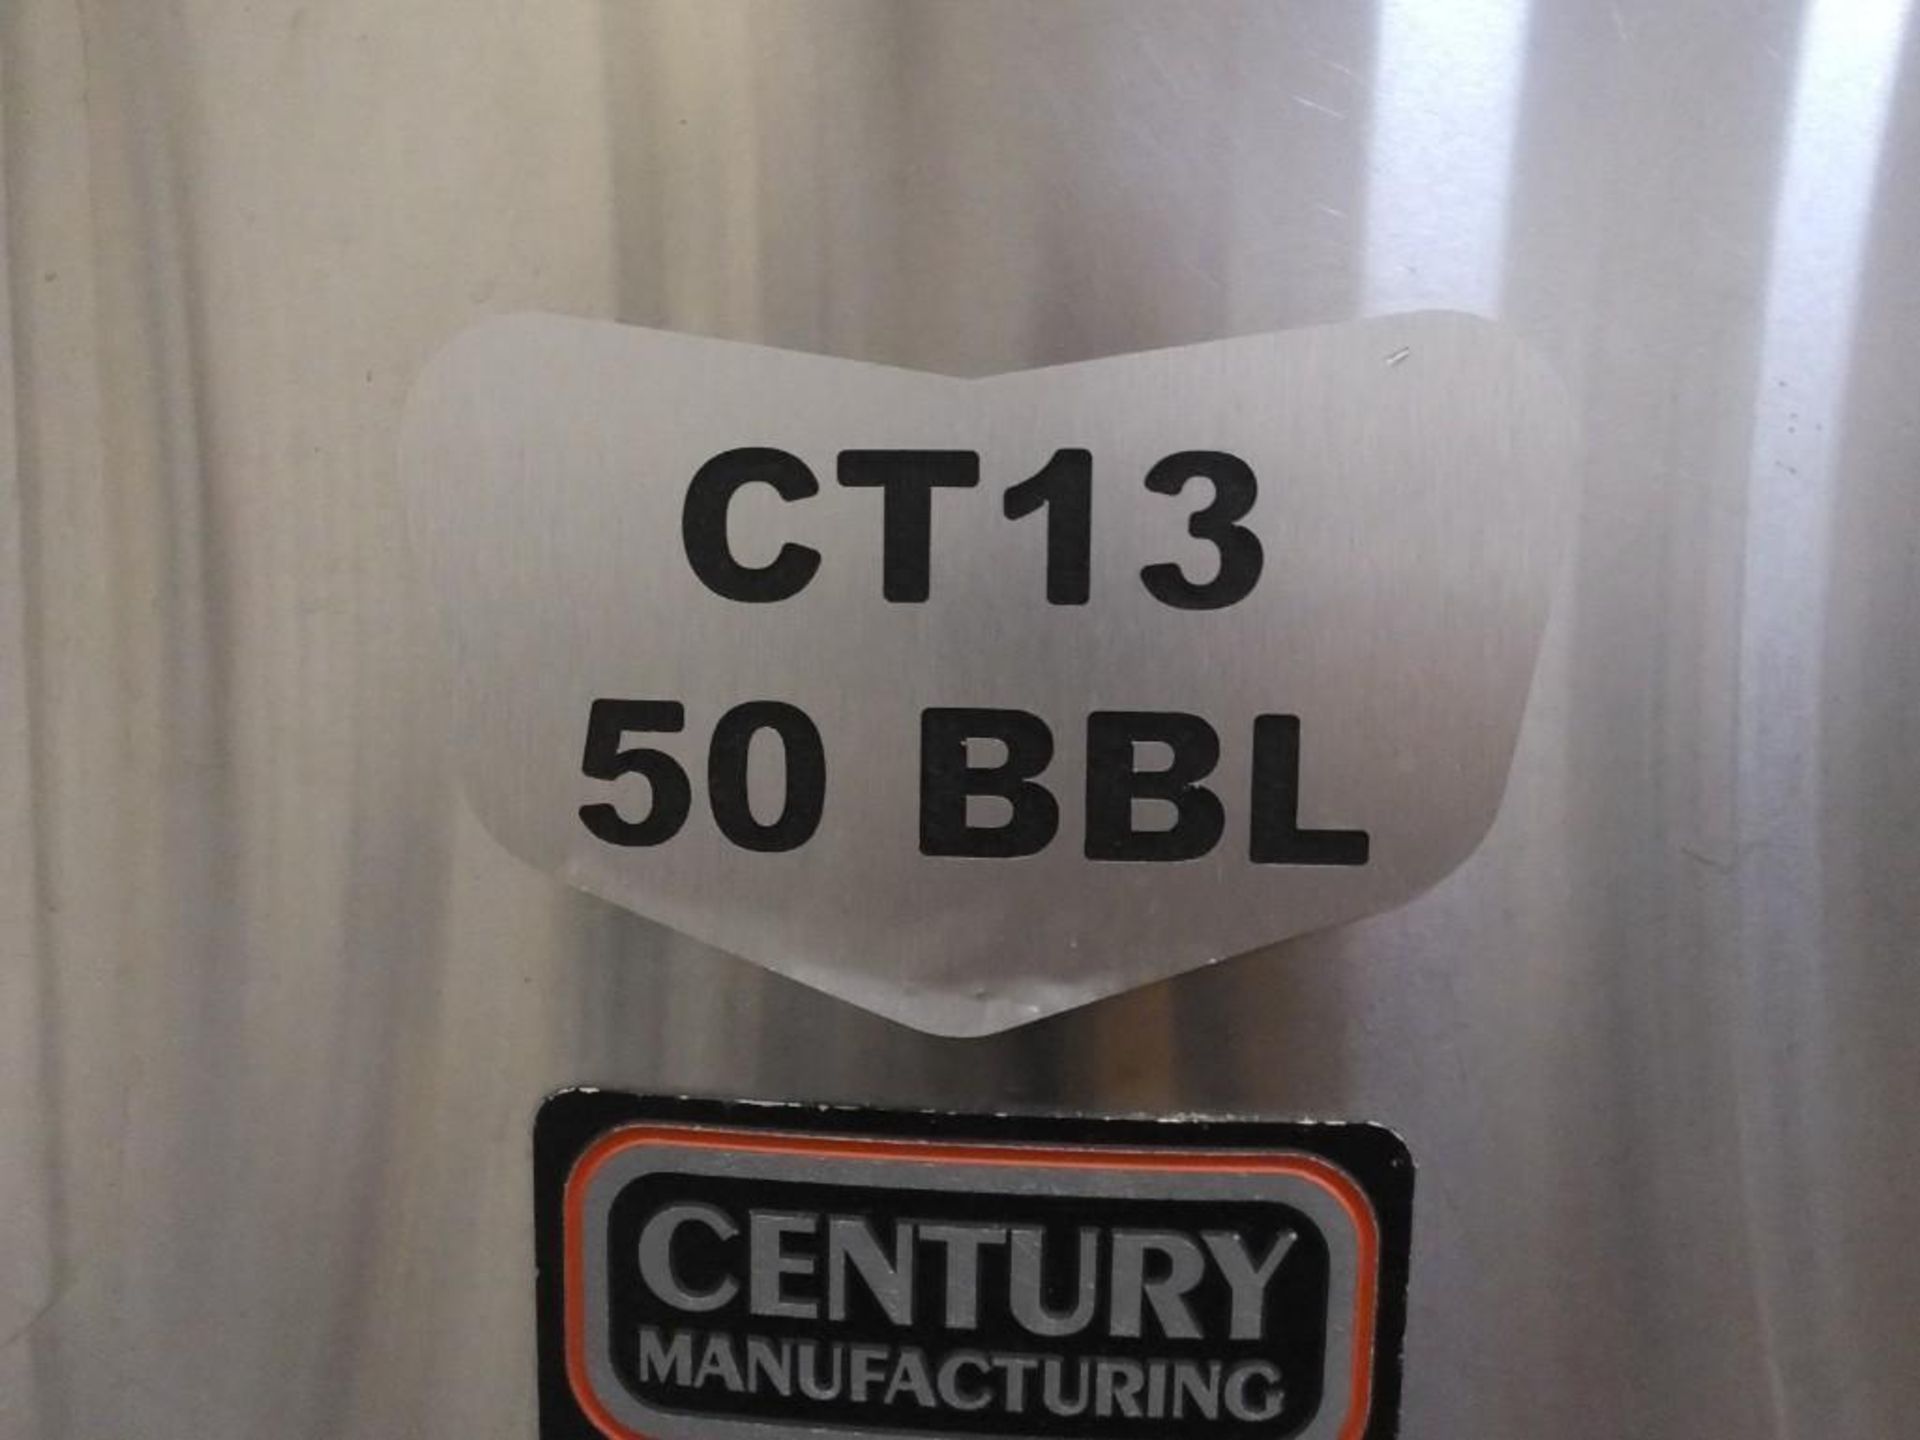 Century Manf. CT13 50 BBL S/S Jacketed Tank - Image 2 of 6